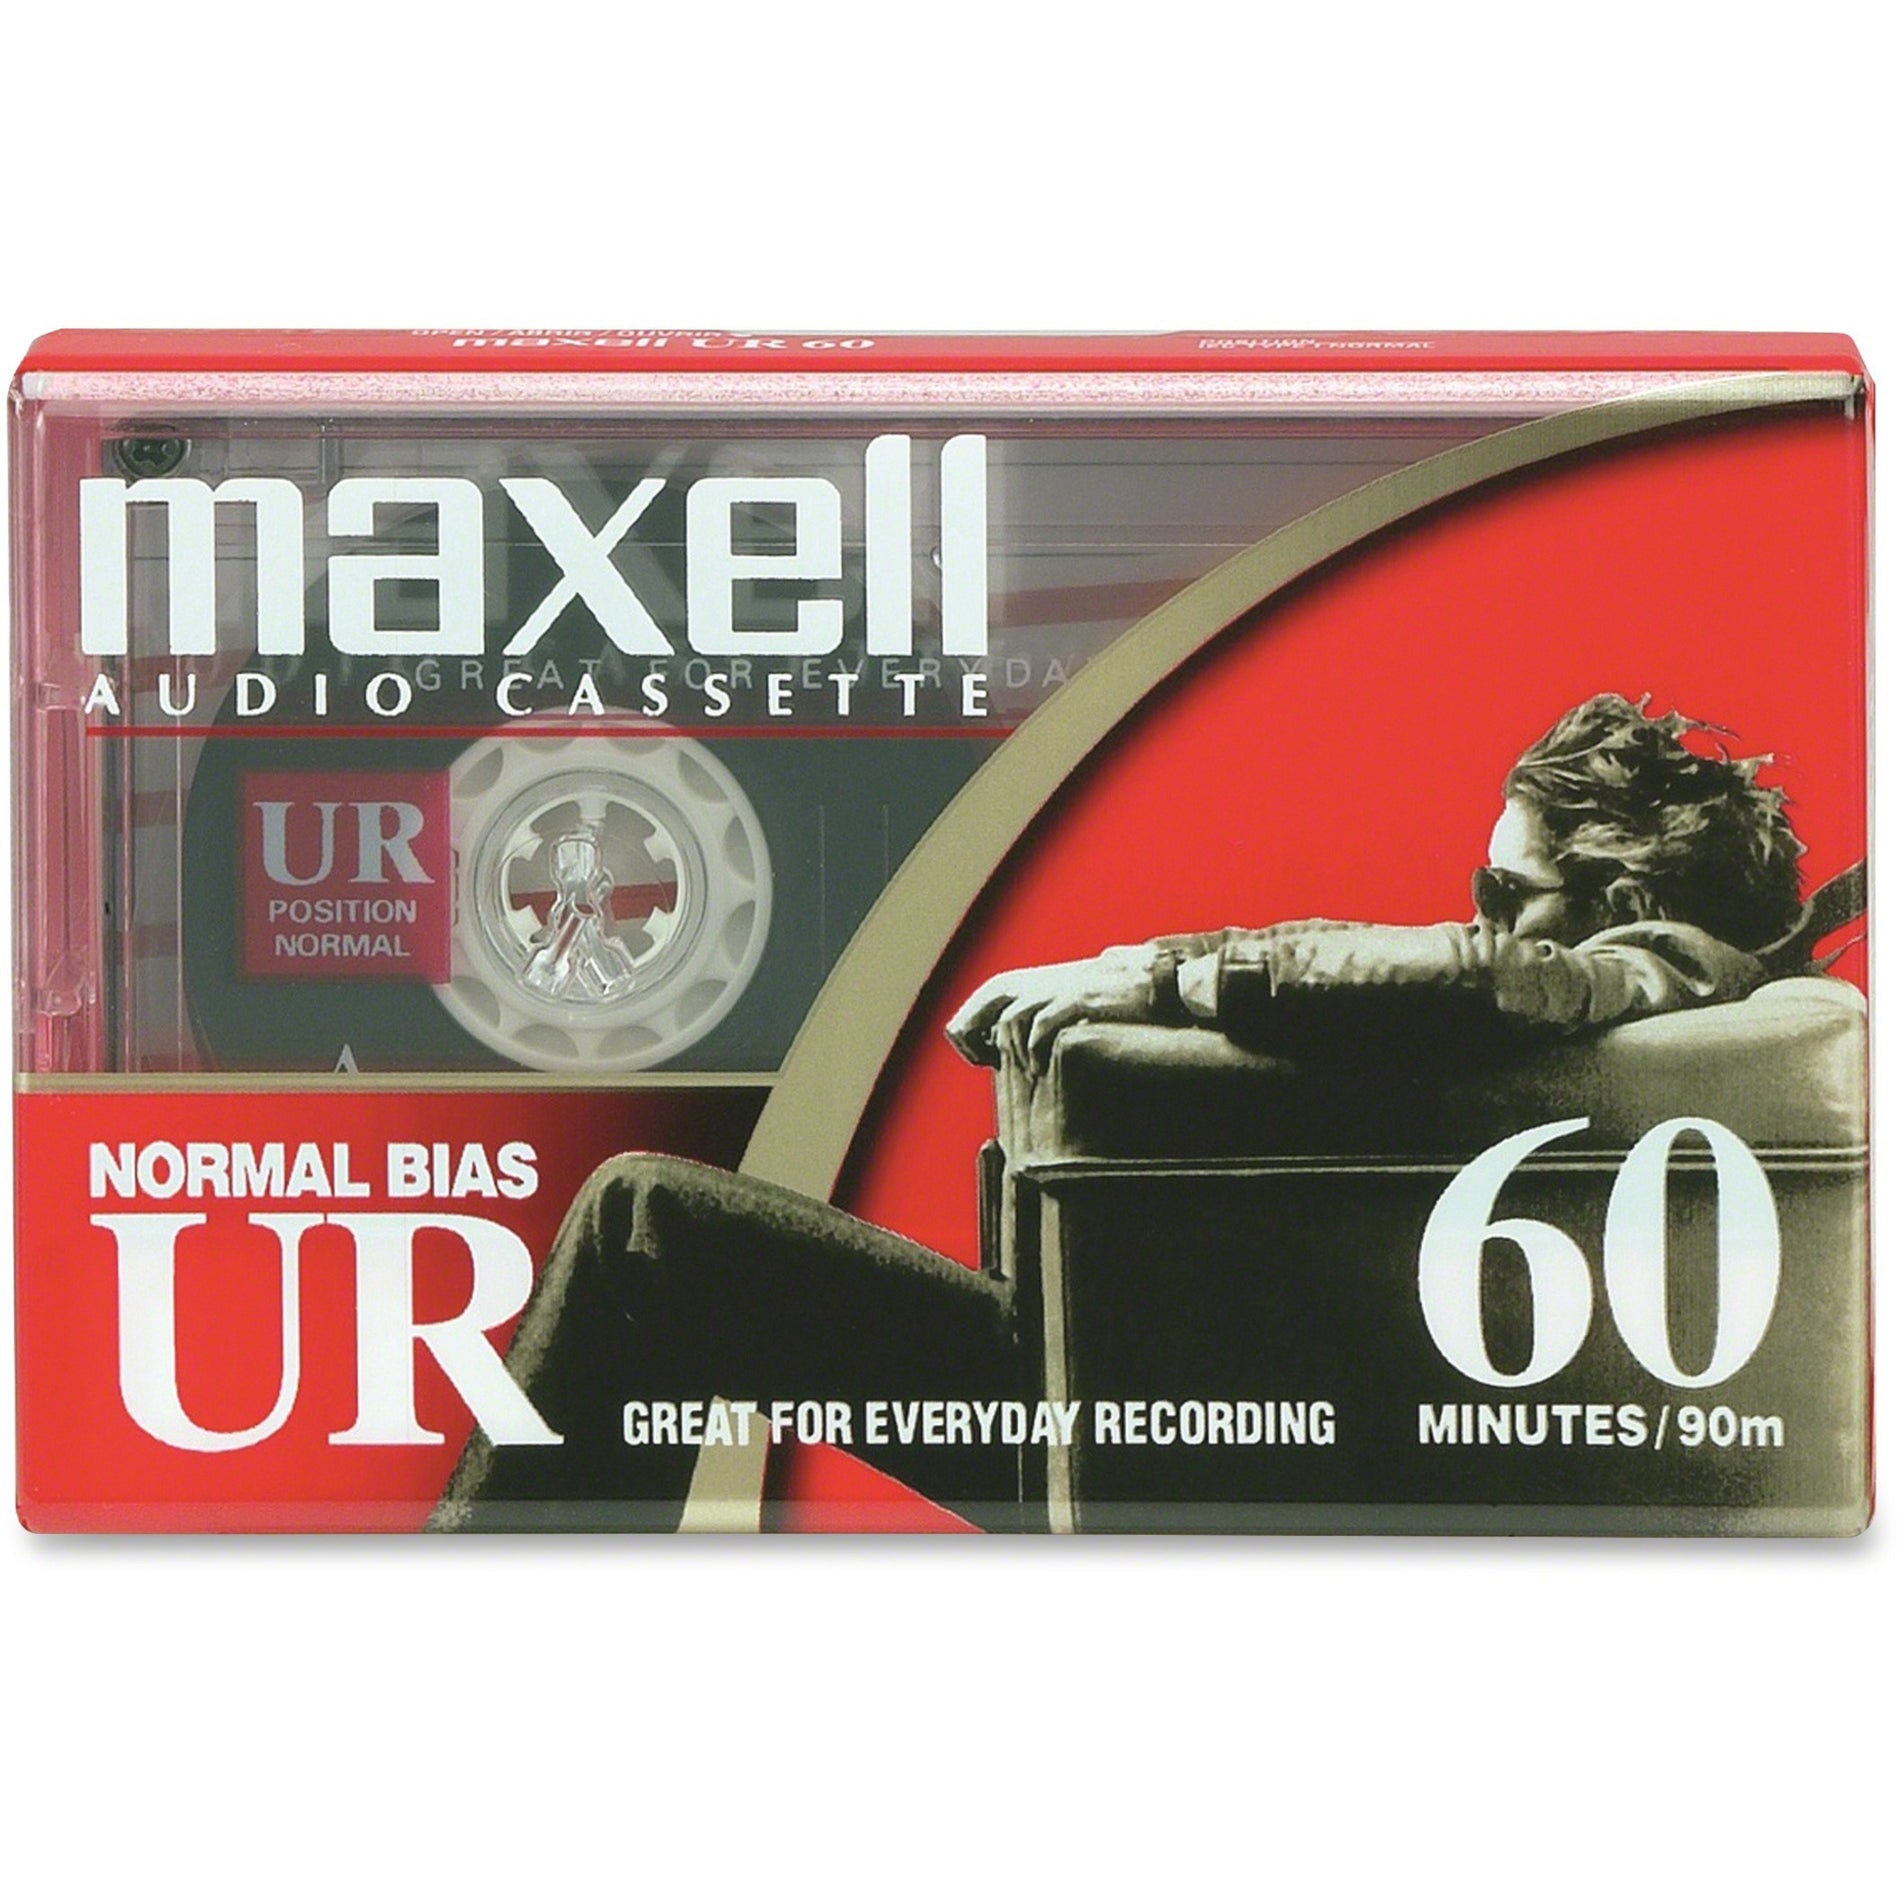 Maxell UR Type I Audio Cassette - 1 x 60 Minute - Normal Bias (109010) [Discontinued]